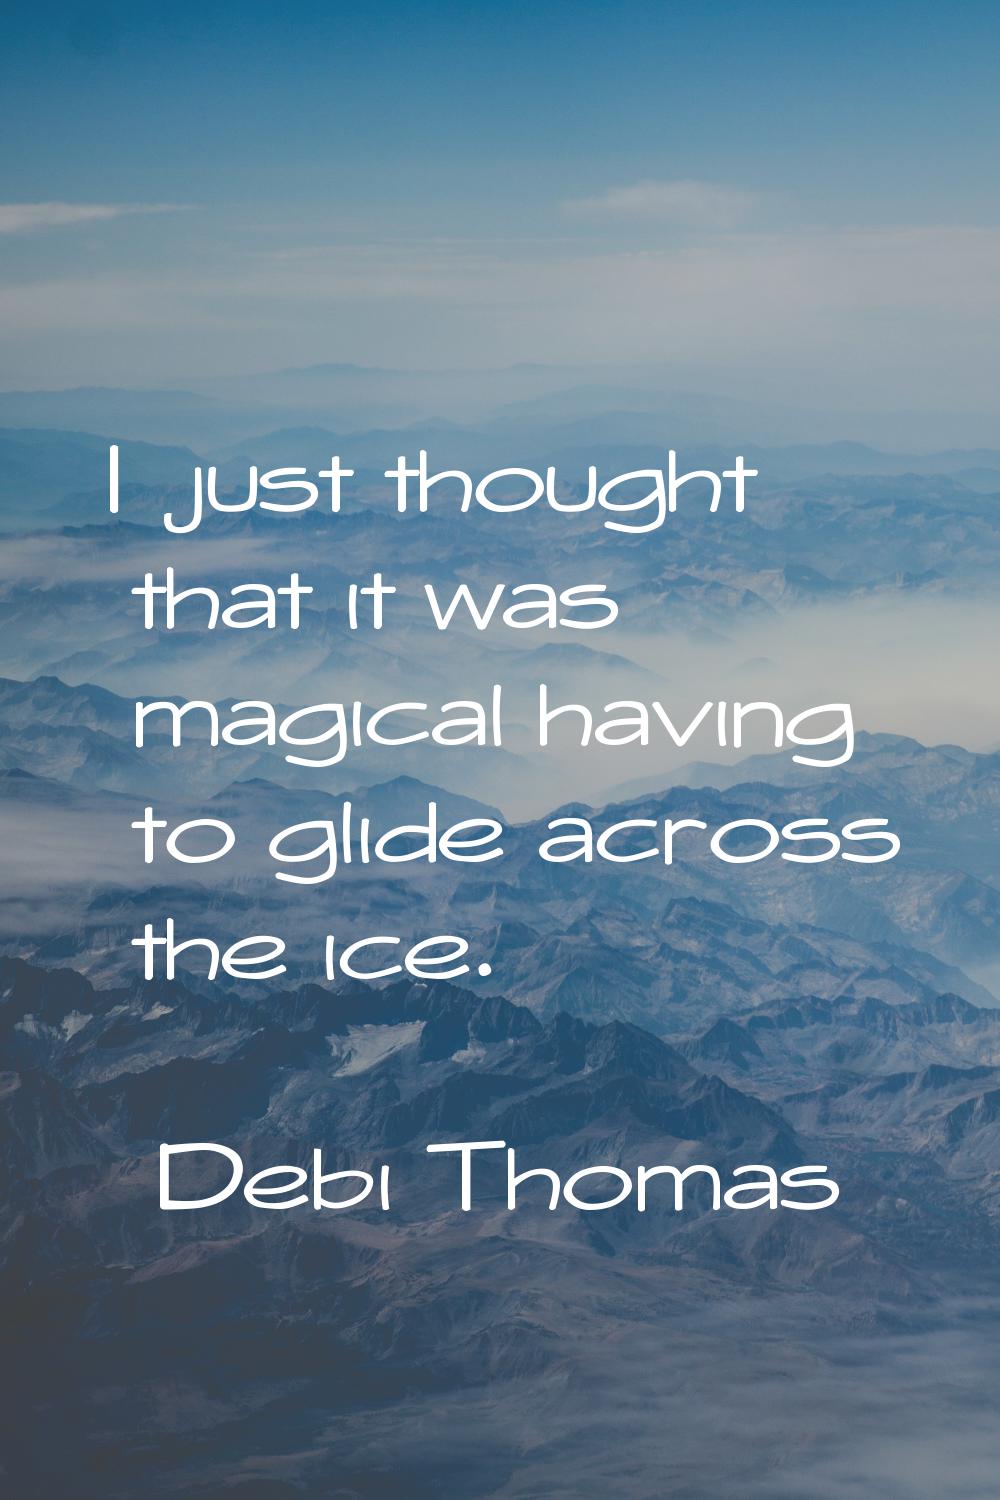 I just thought that it was magical having to glide across the ice.